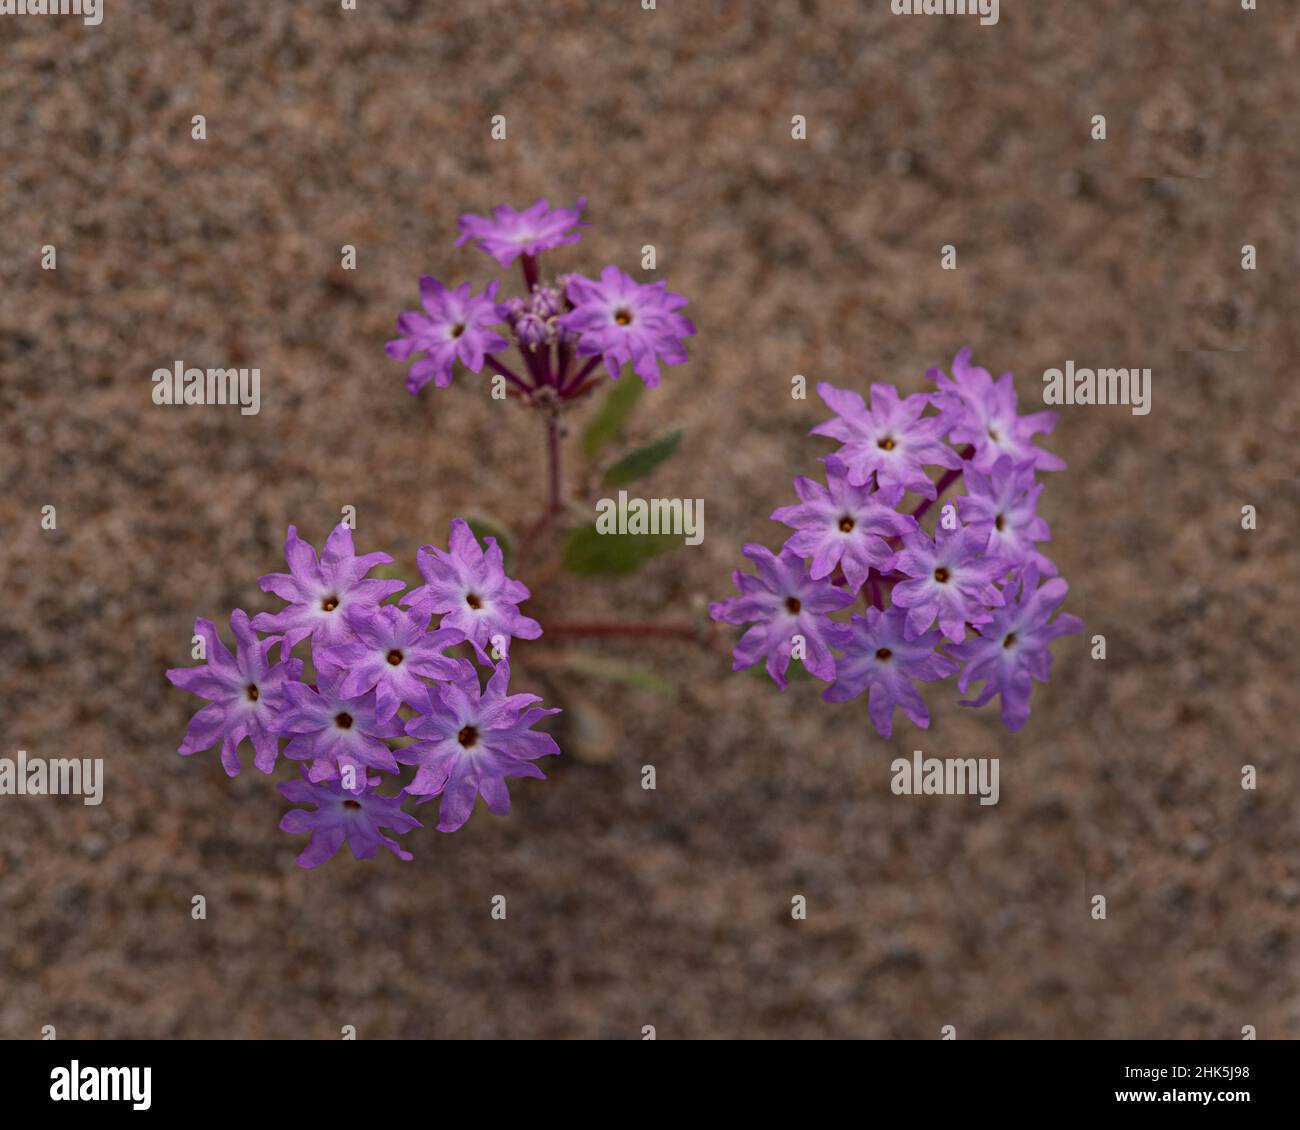 Pink Sand Verbena (Abronia umbellata) in the southern Desert of California, viewed from above Stock Photo